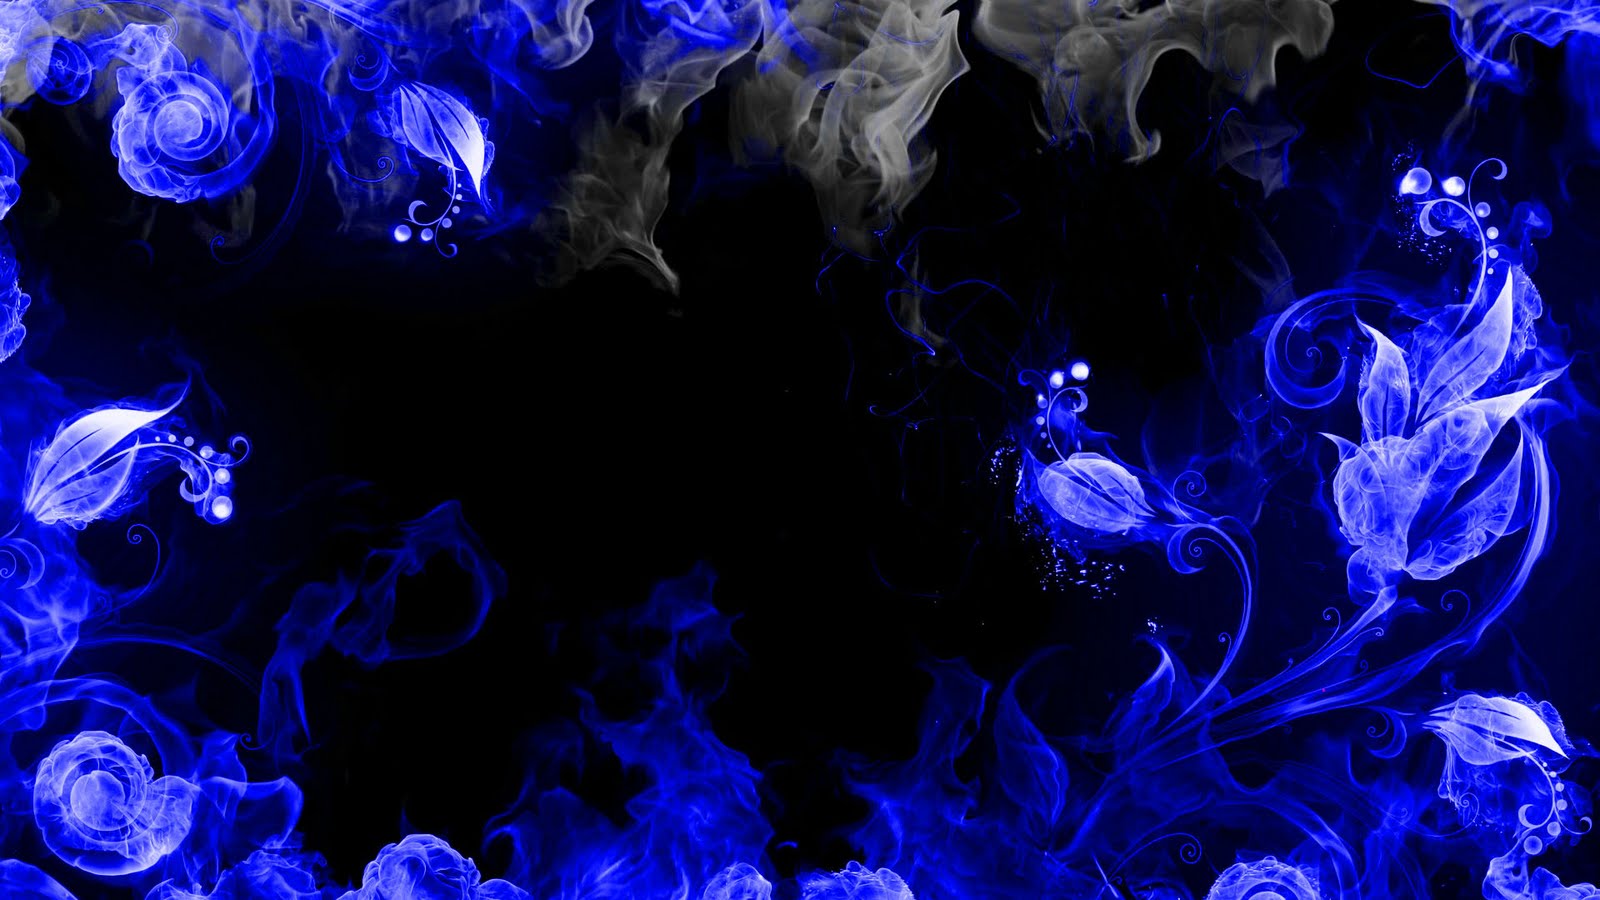 Gallery For Gt Anime Blue Fire Background